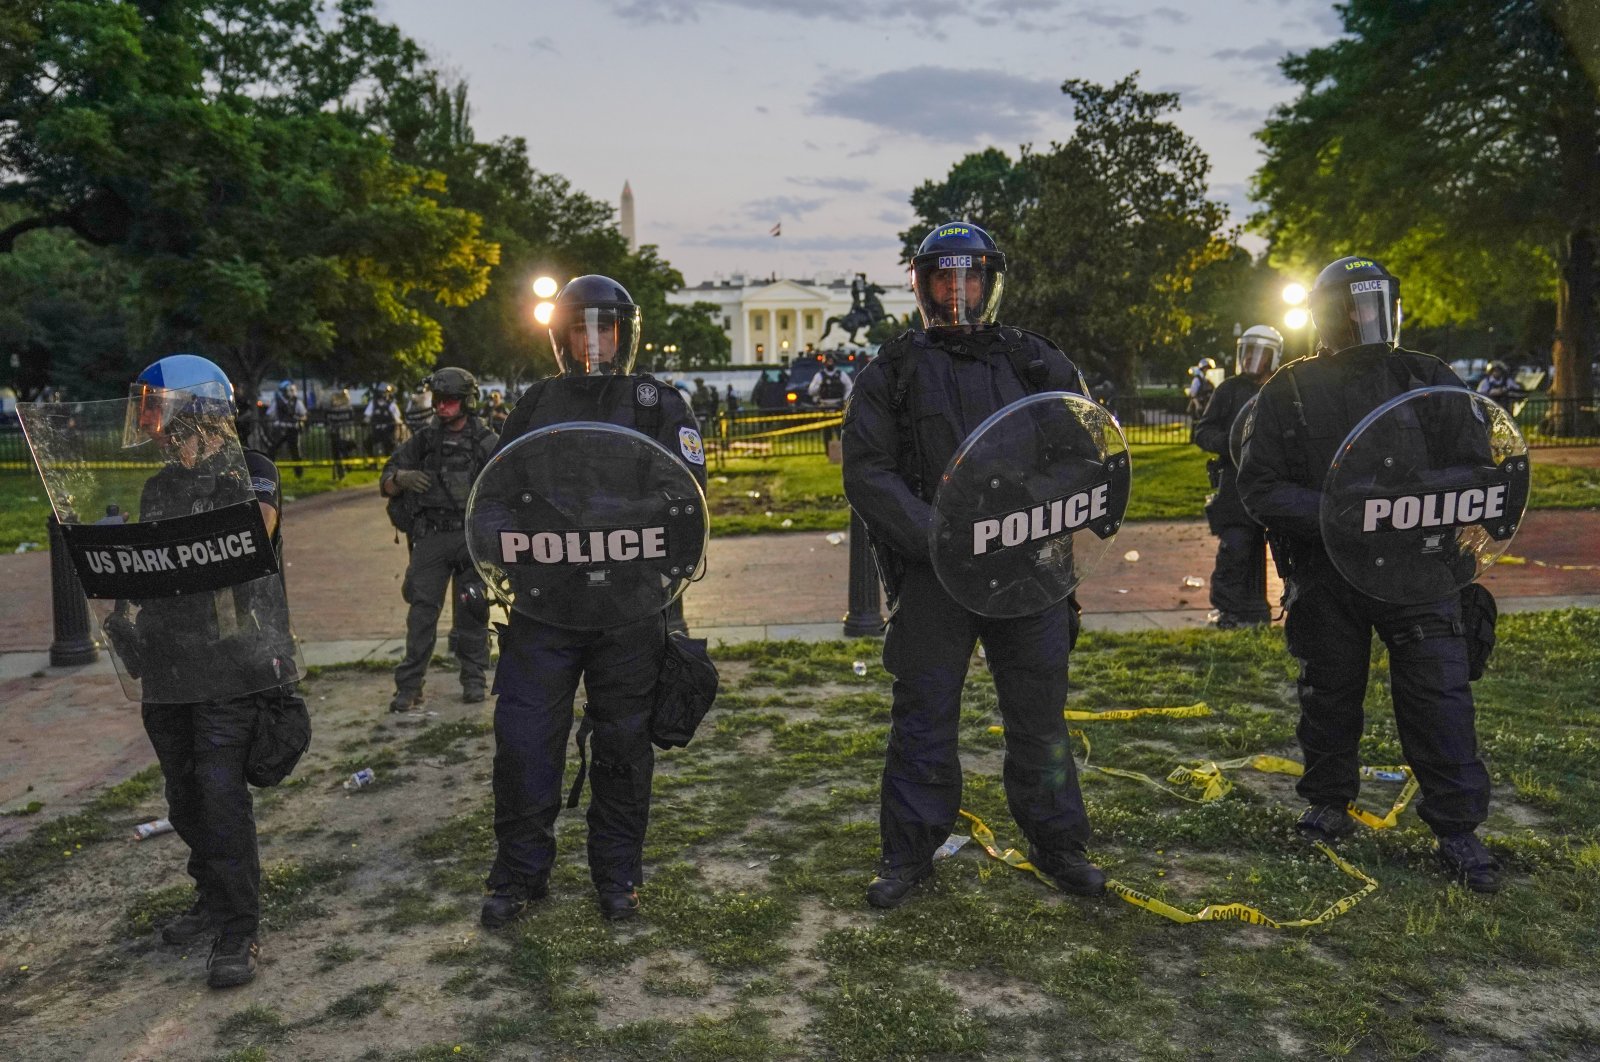 Police in riot gear stand in front of the White House as demonstrators gather to protest the death of George Floyd, Saturday, May 30, 2020, outside the White House in Washington. (AP Photo)